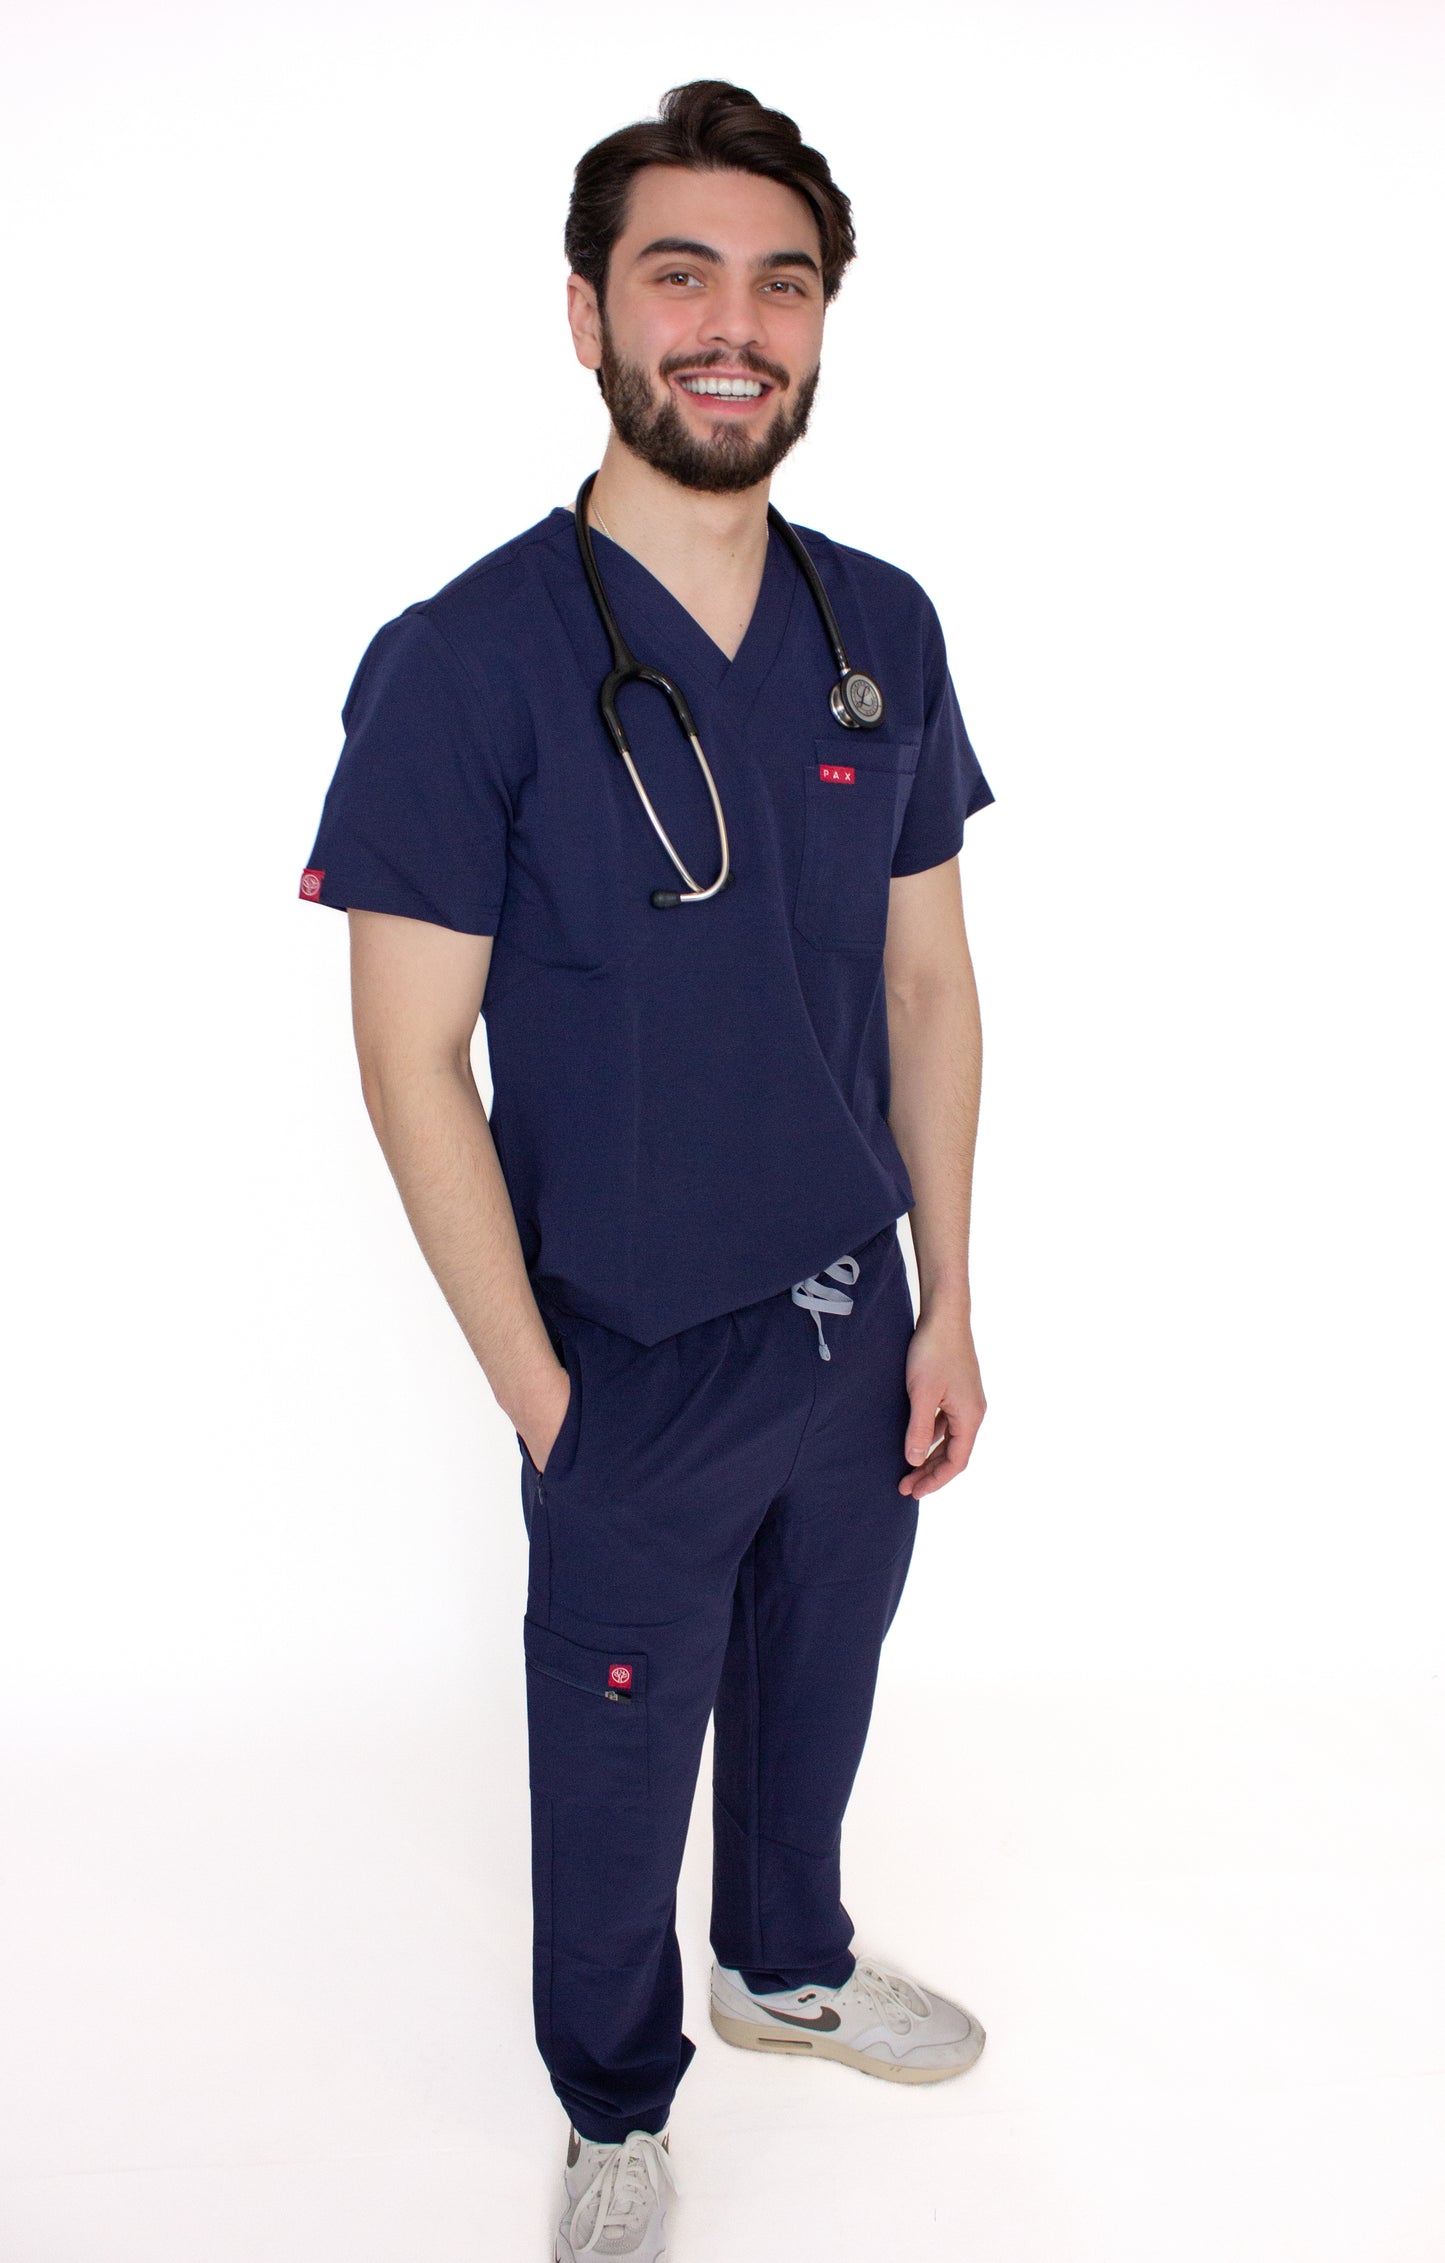 Smiling male healthcare worker in royal blue PAX scrubs with a stethoscope and sneakers.